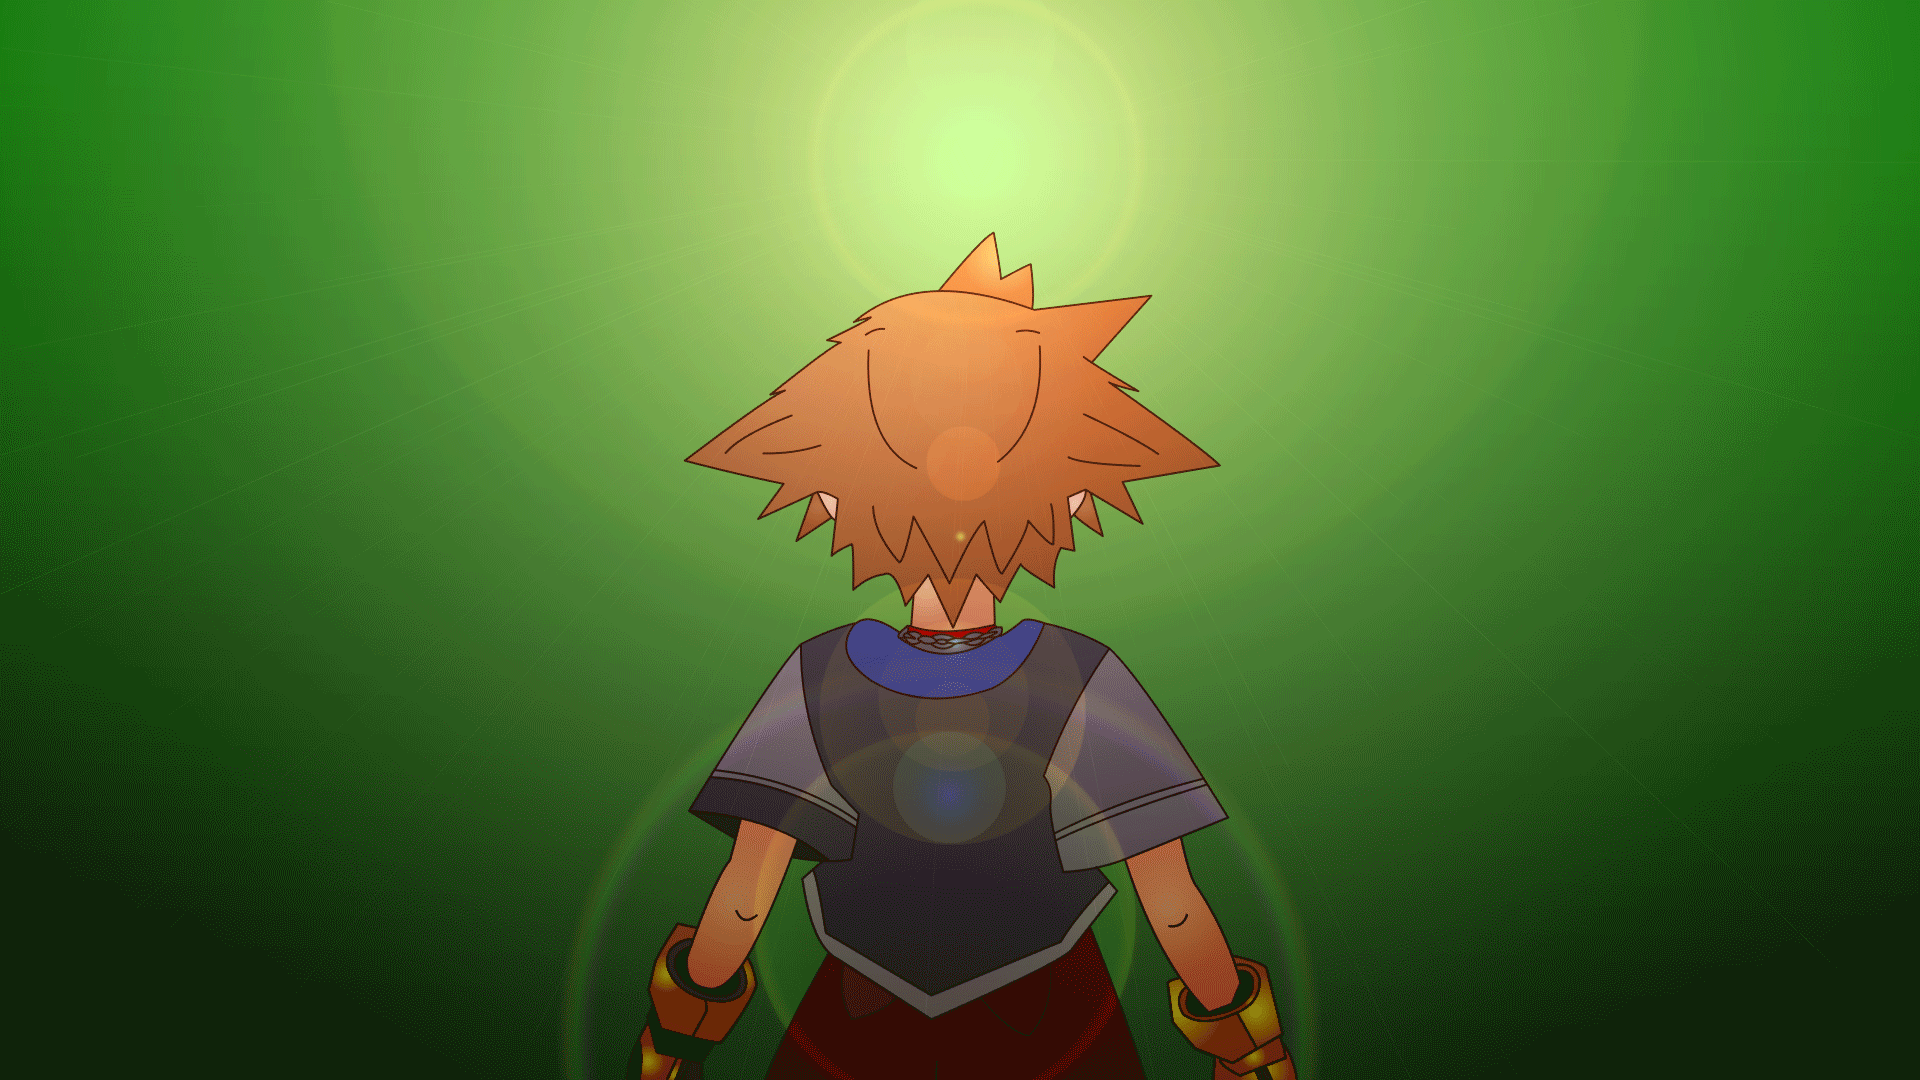 Kingdom Hearts Dropped Animation Project - Sora by UberStorm on DeviantArt